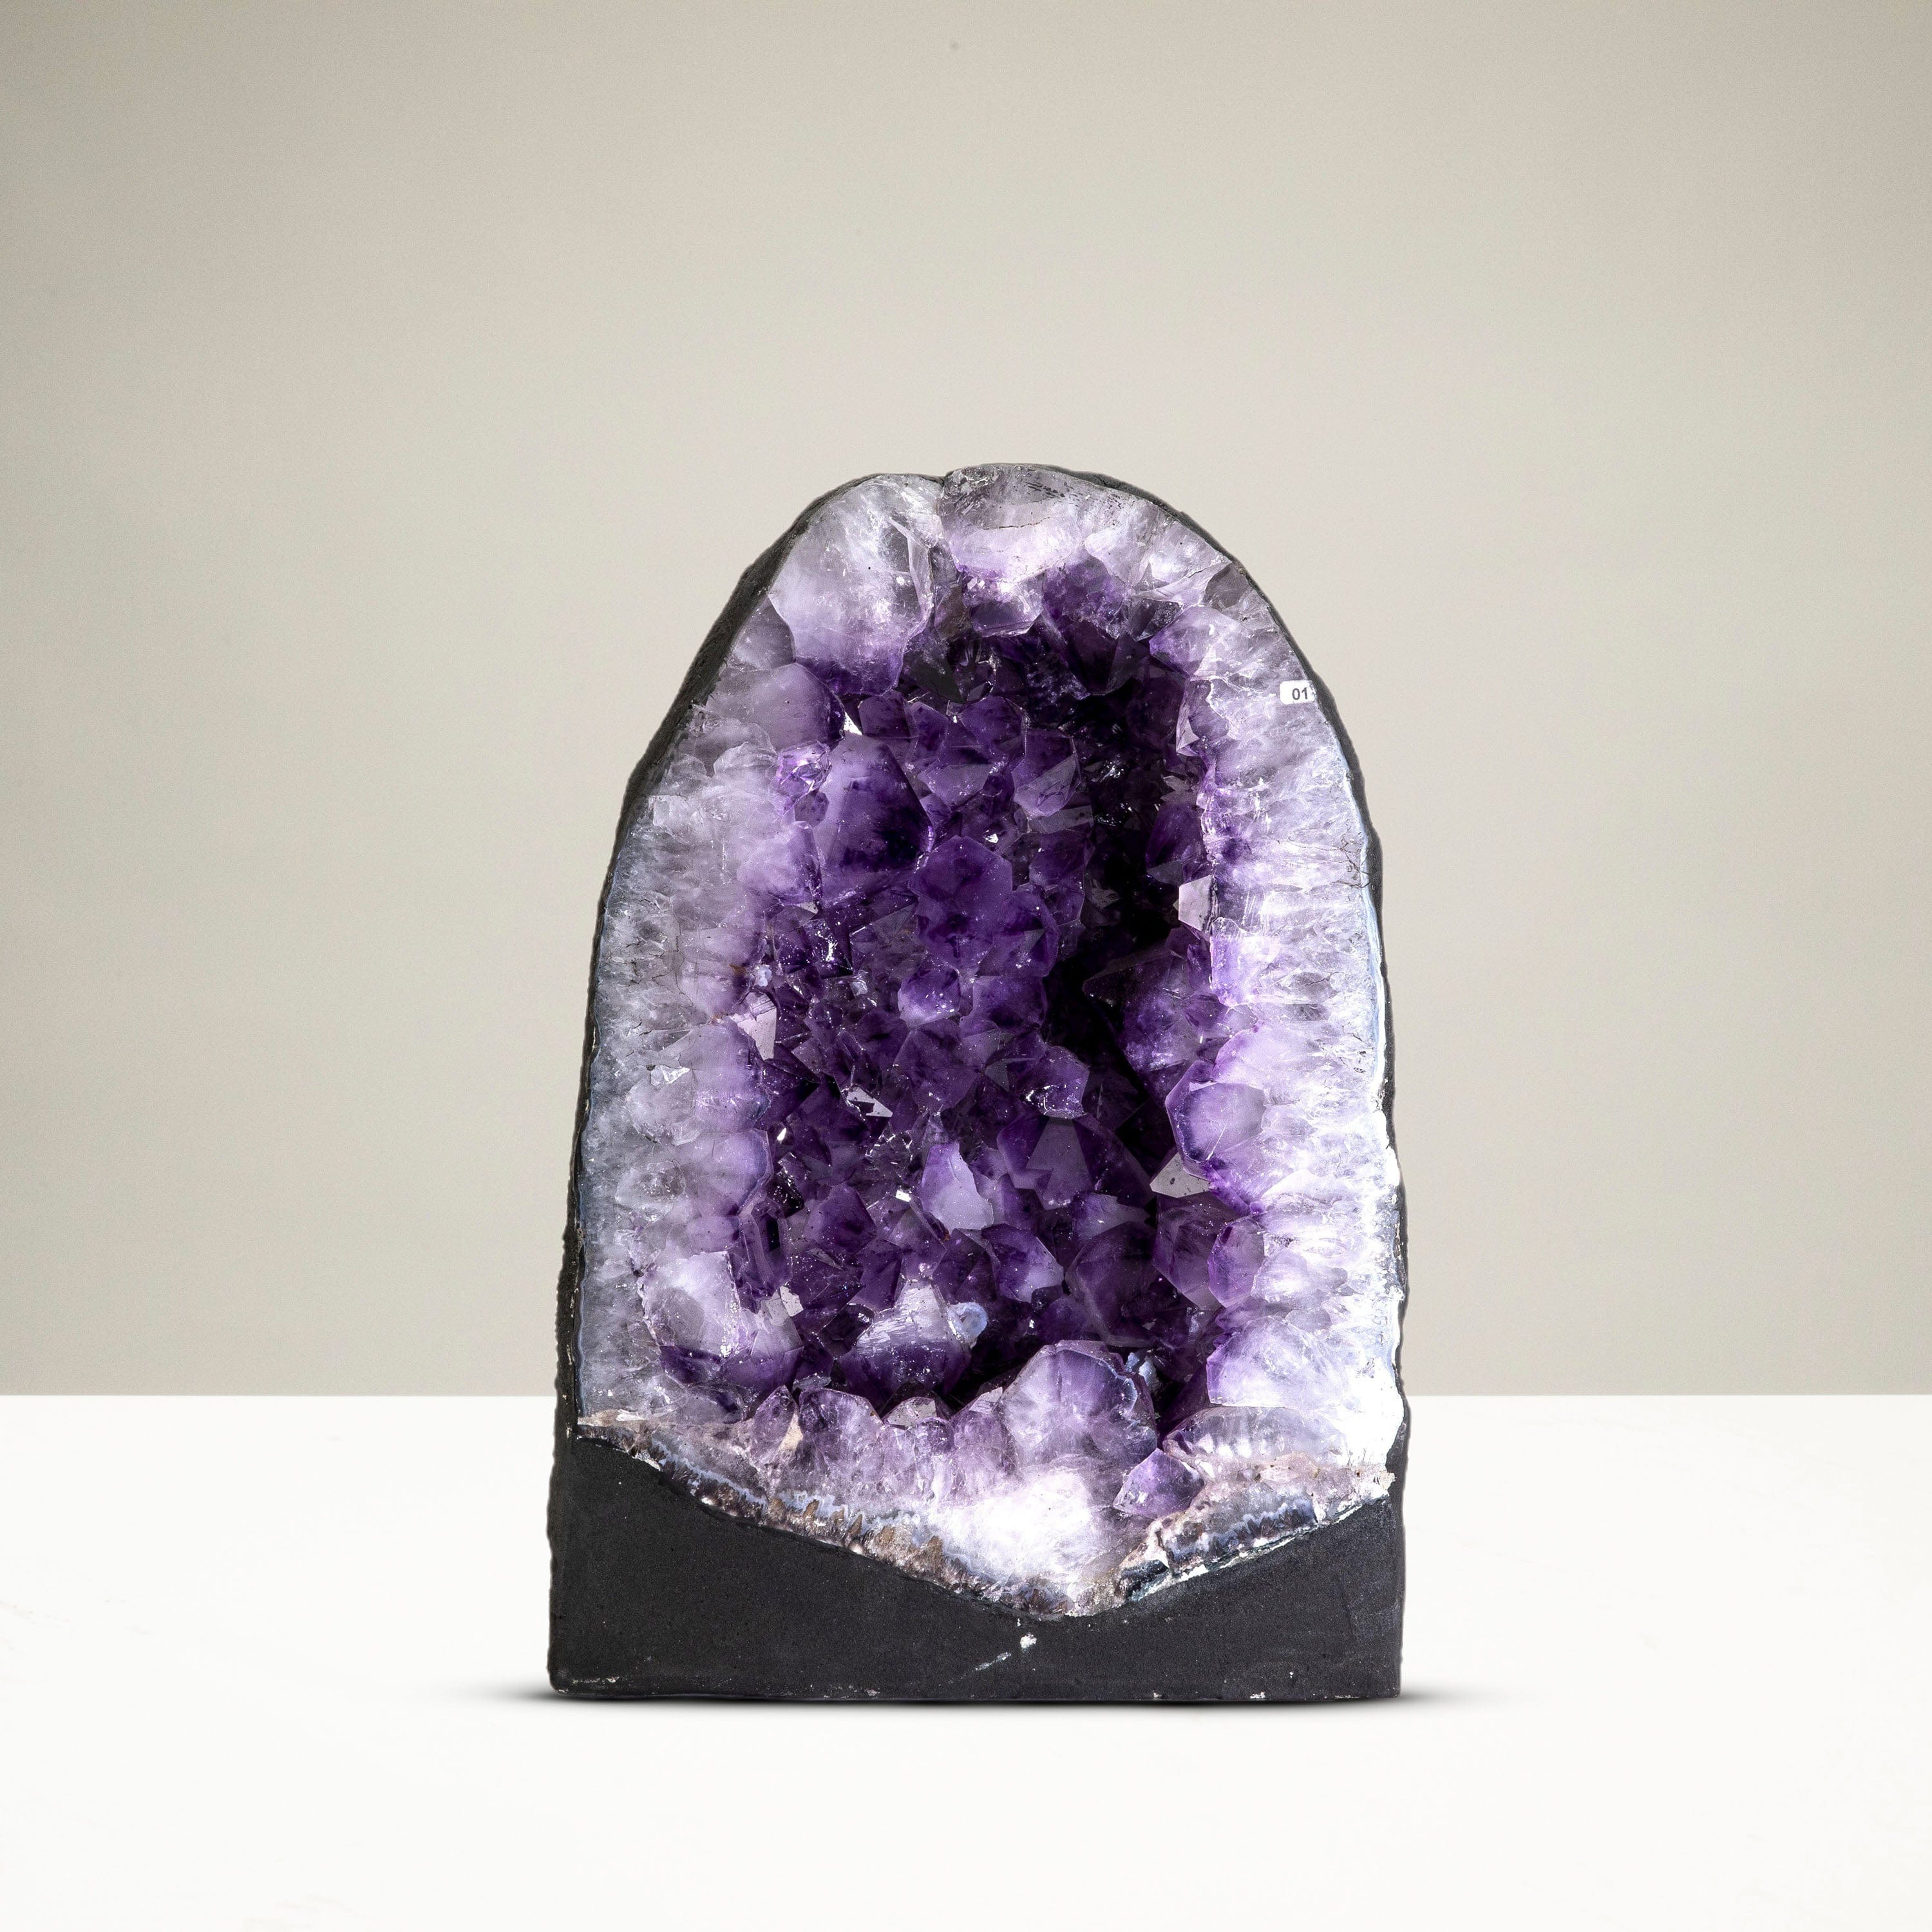 Kalifano Amethyst Natural Brazilian Amethyst Crystal Geode Cathedral - 16.5 in / 58 lbs BAG7200.002